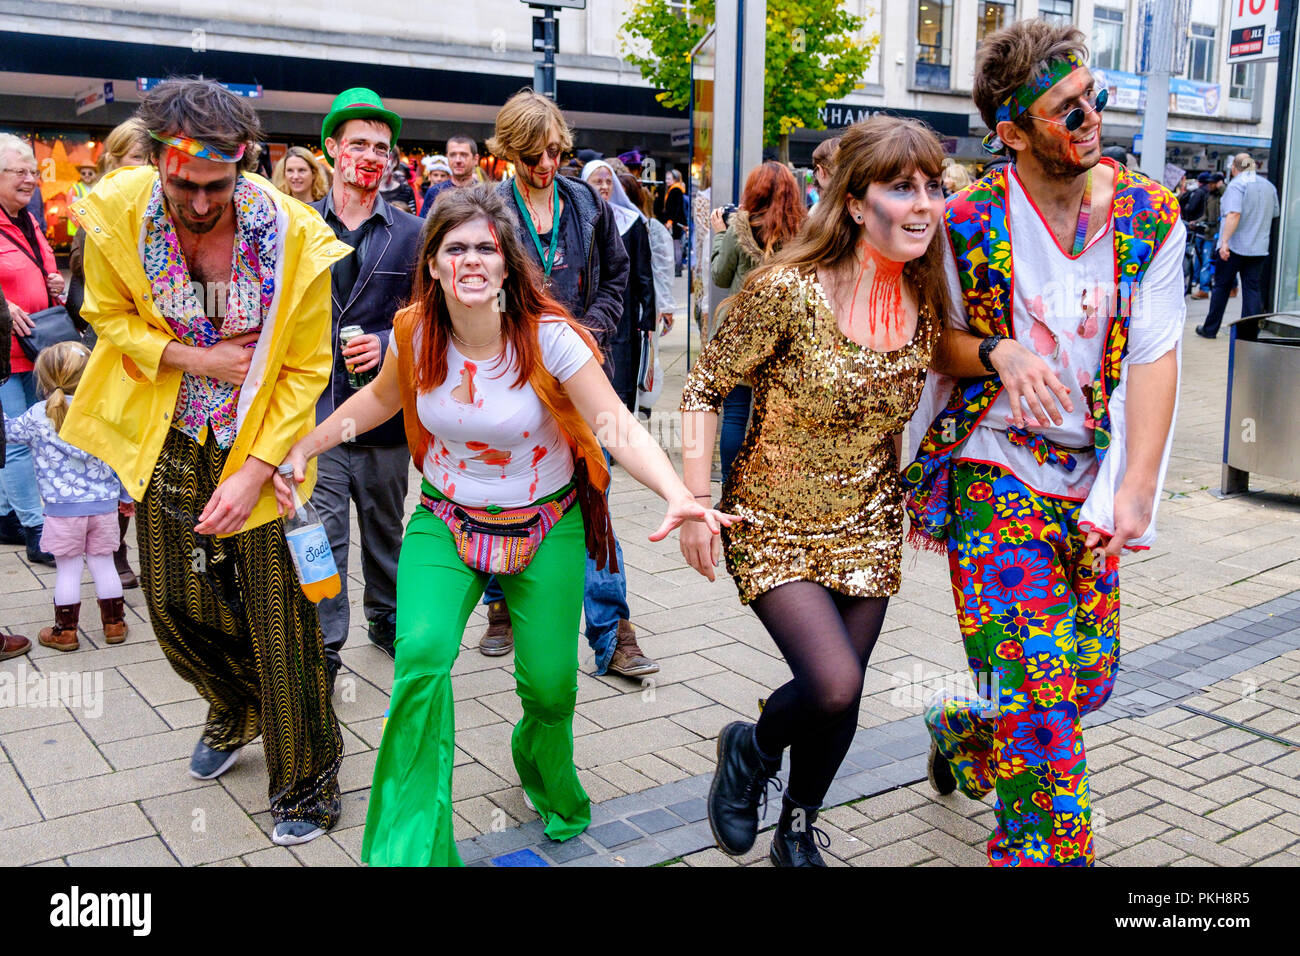 Bristol, UK. 28th Oct, 2017. People dressed as zombies are pictured as they take part in a zombie walk through the city centre. Stock Photo